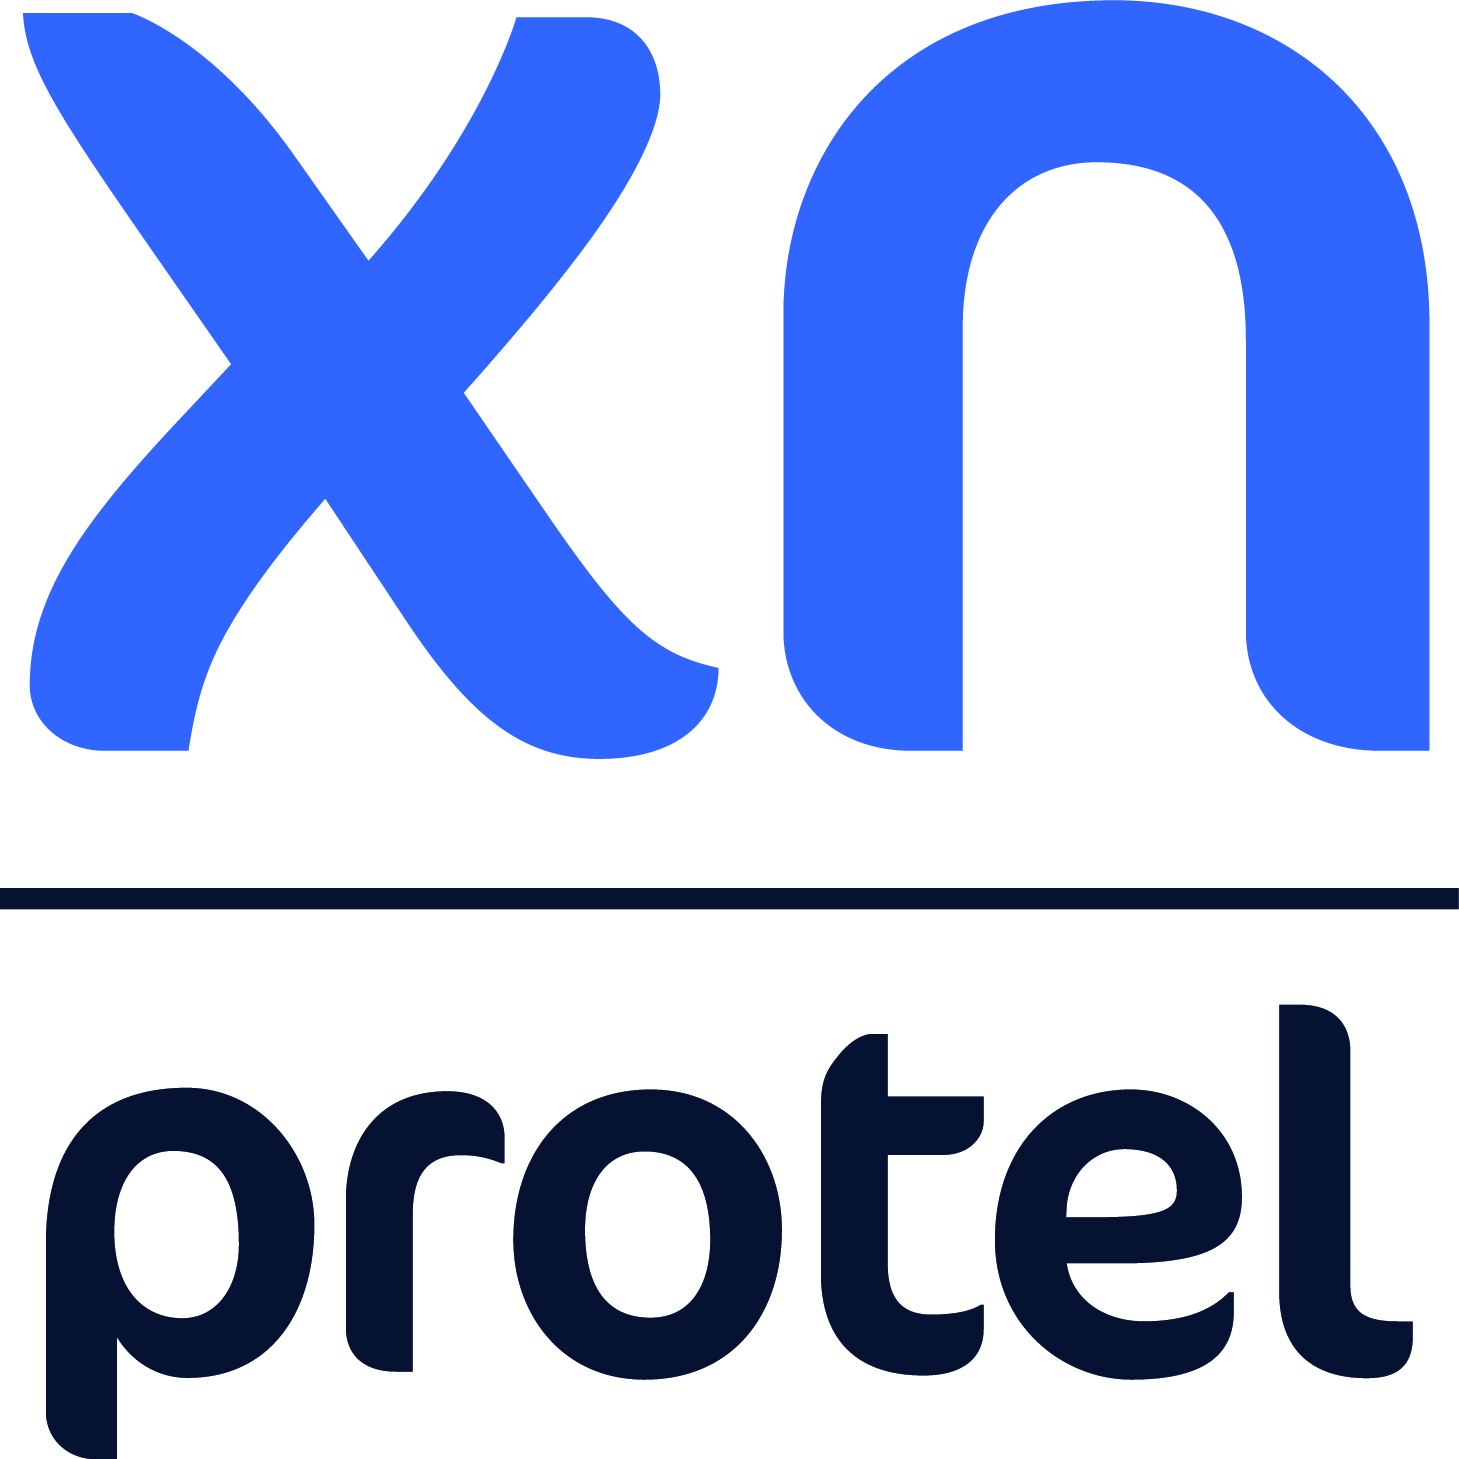 Xn protel Systems